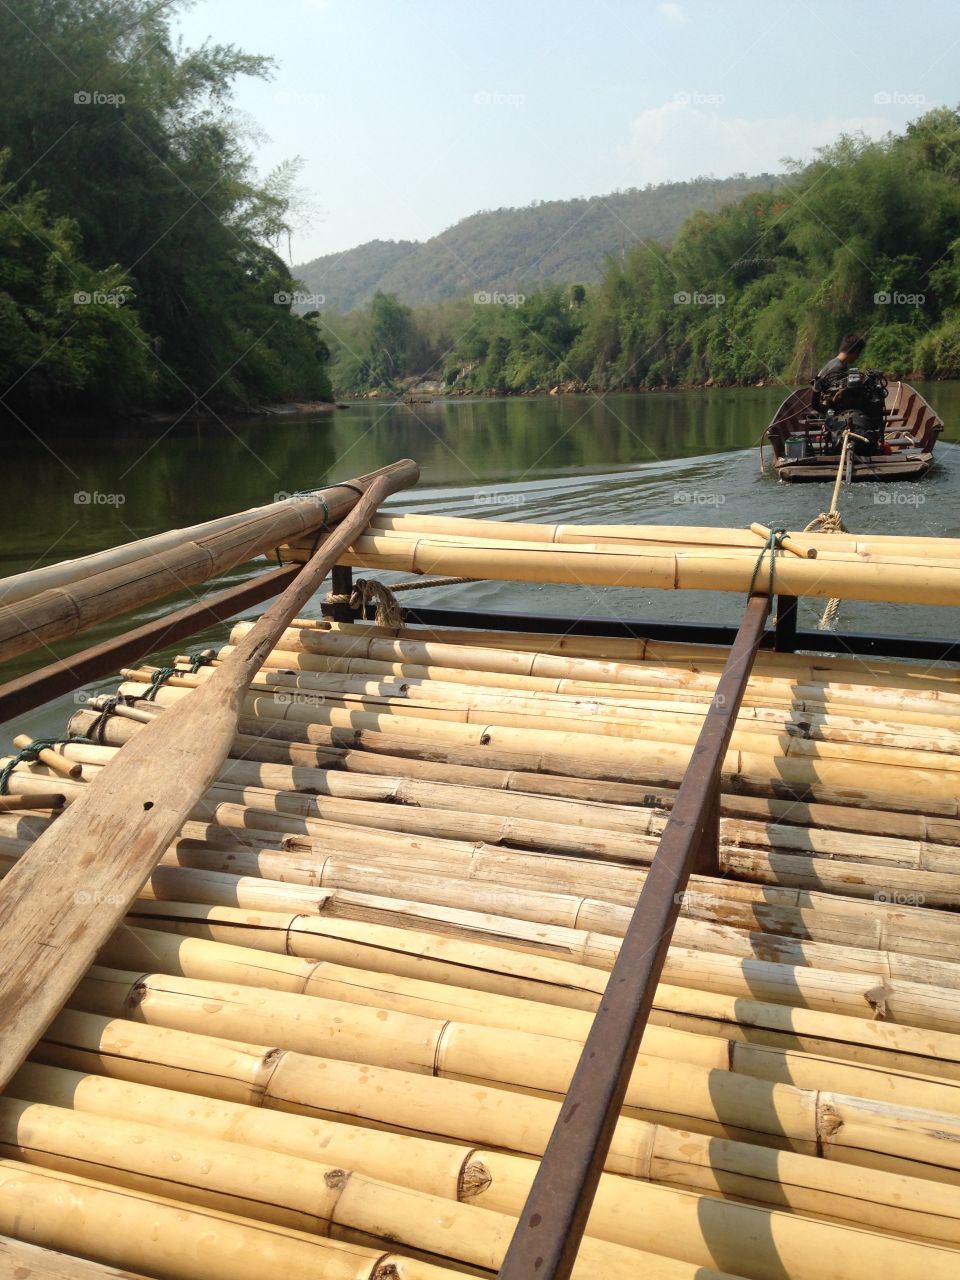 Bamboo boat in northern Thailand, Thai farmers ride across to get to work